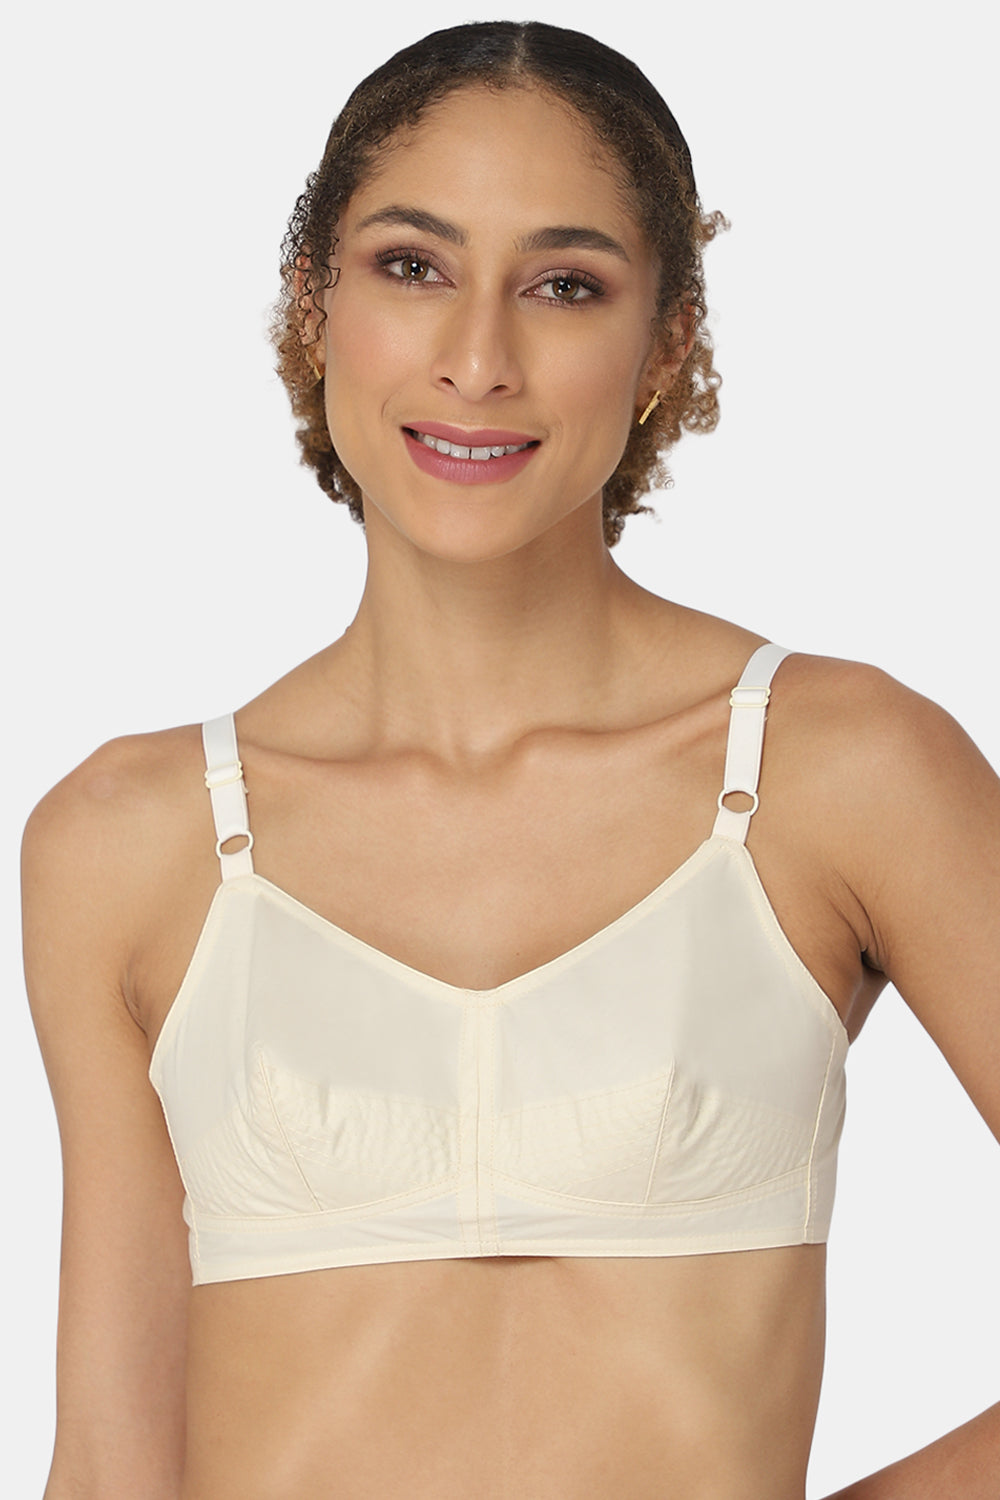 Buy Naidu Hall Women's Cotton Brassiere Non-Padded Non-Wired Moderate  Coverage Laced Neckline Regular Bra Pack of 3 at